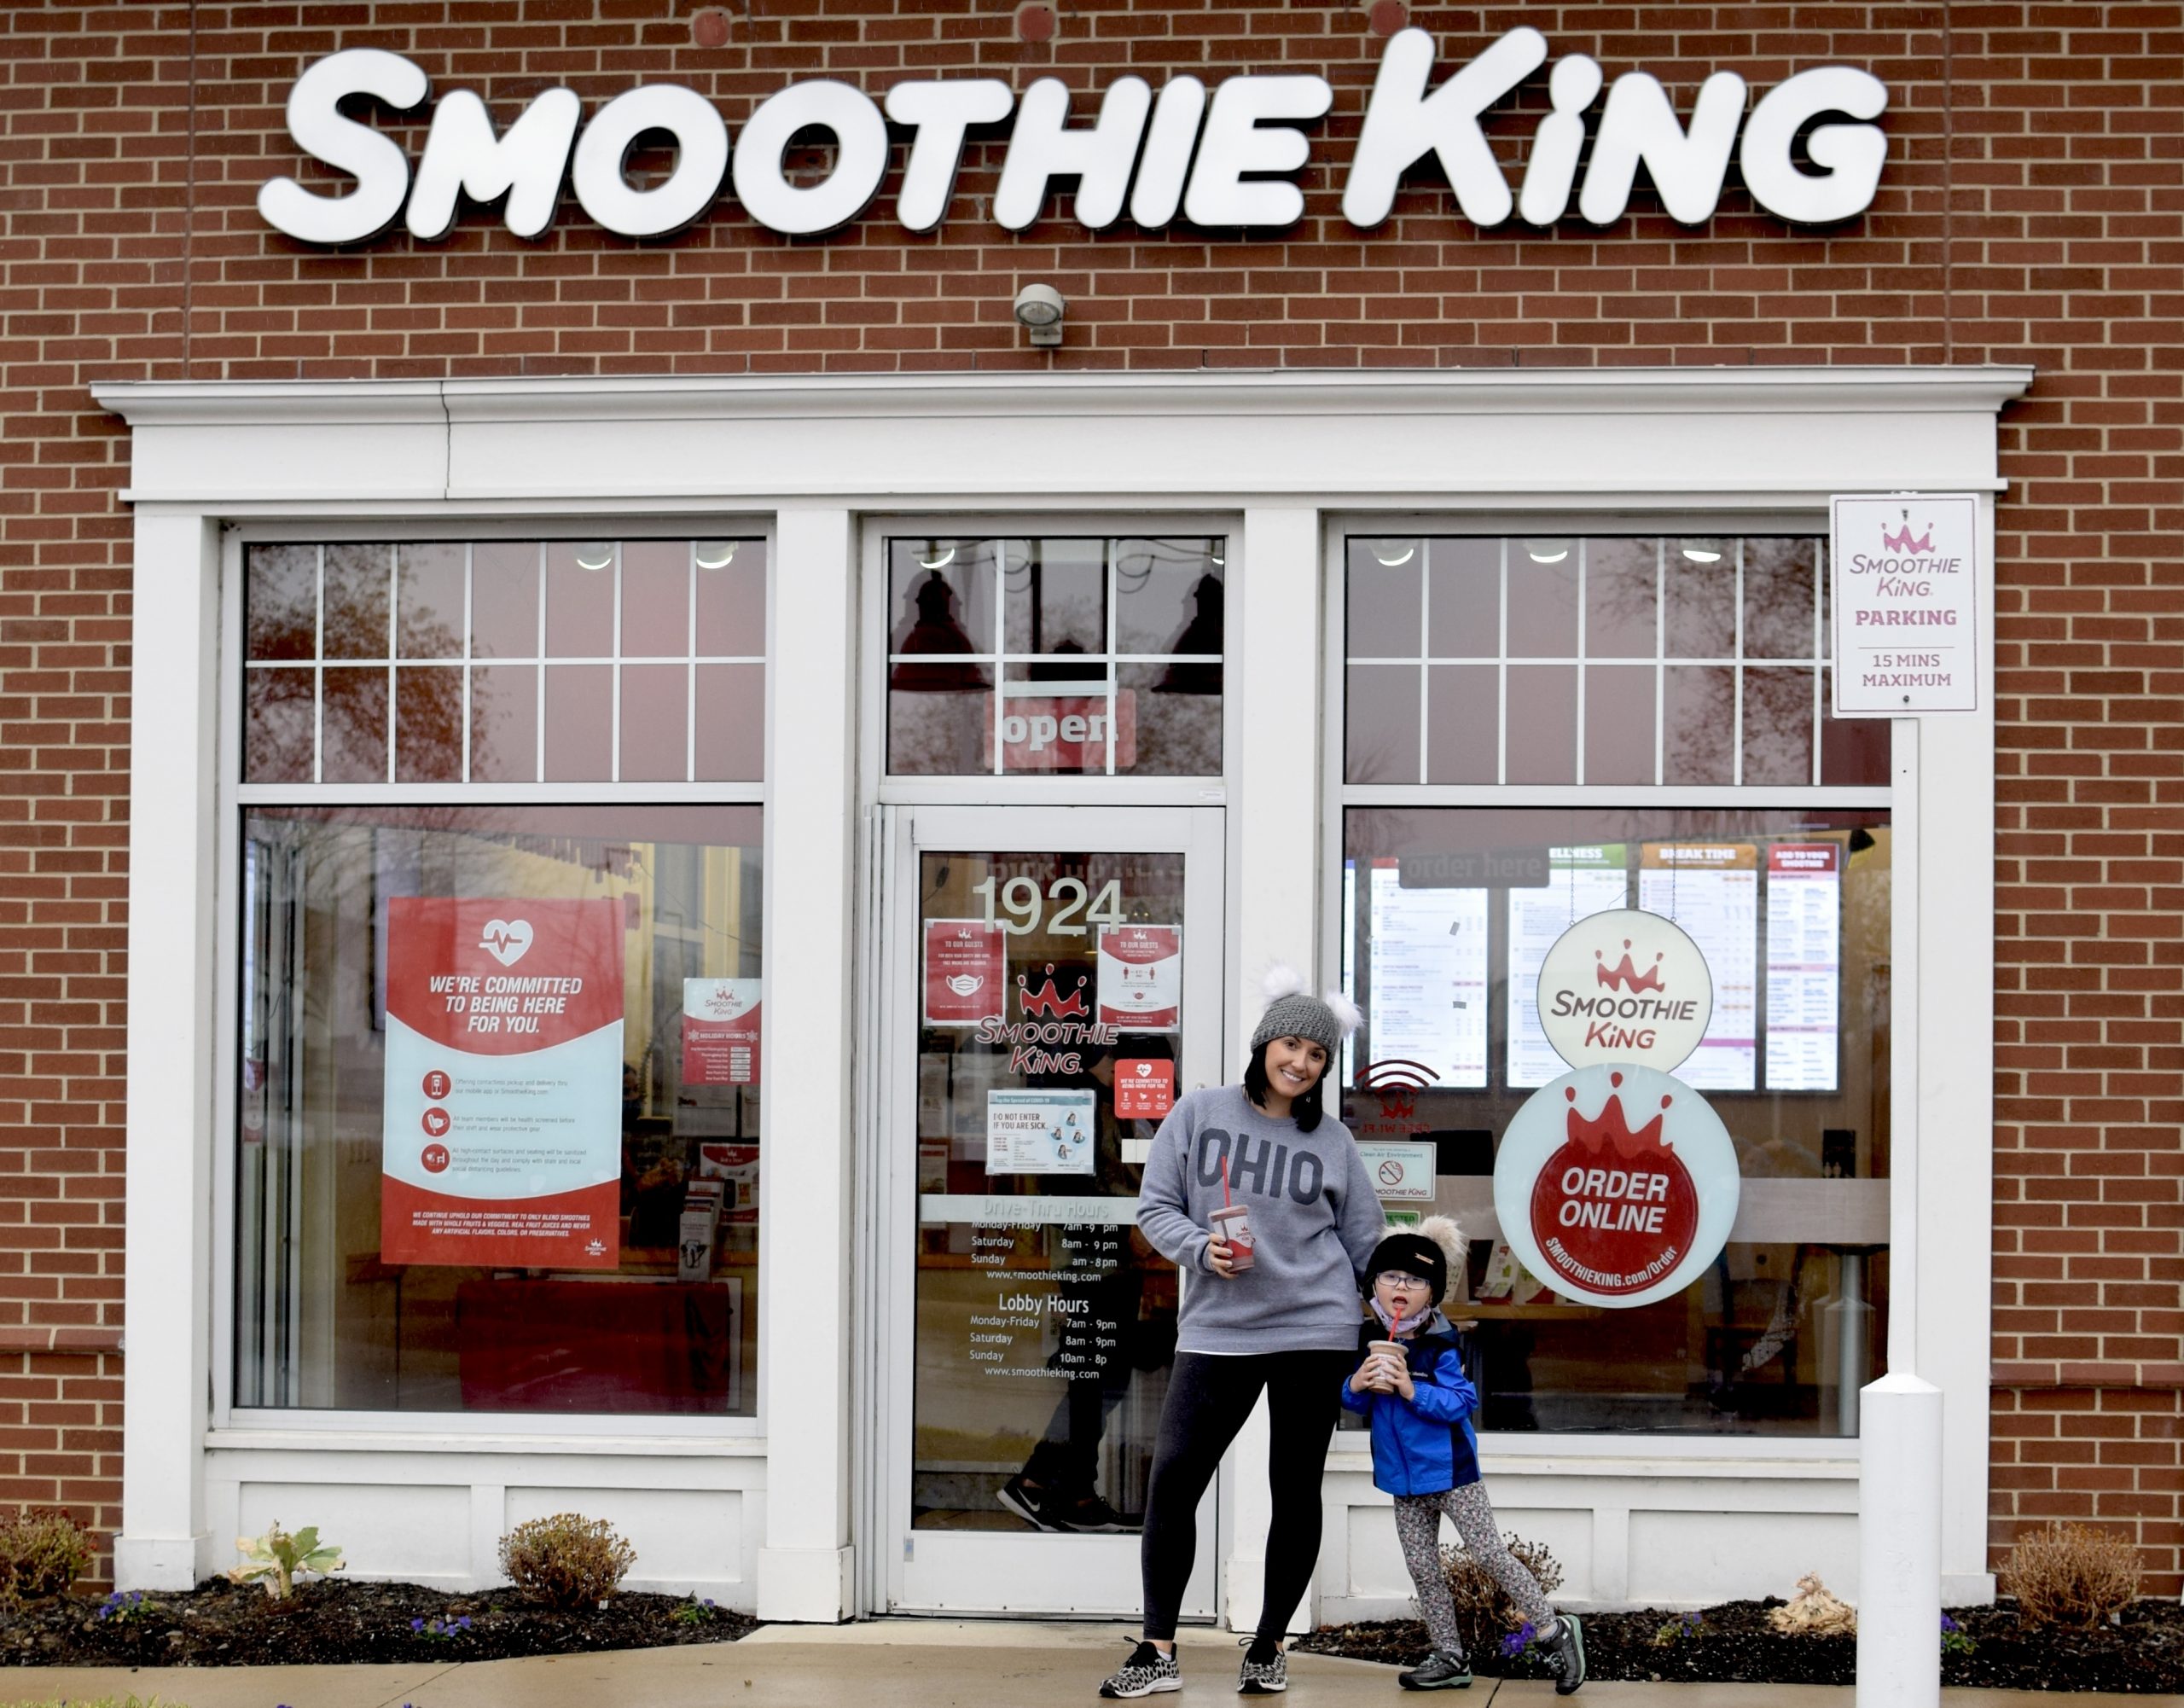 Smoothie King has Two New Locations in Central Ohio